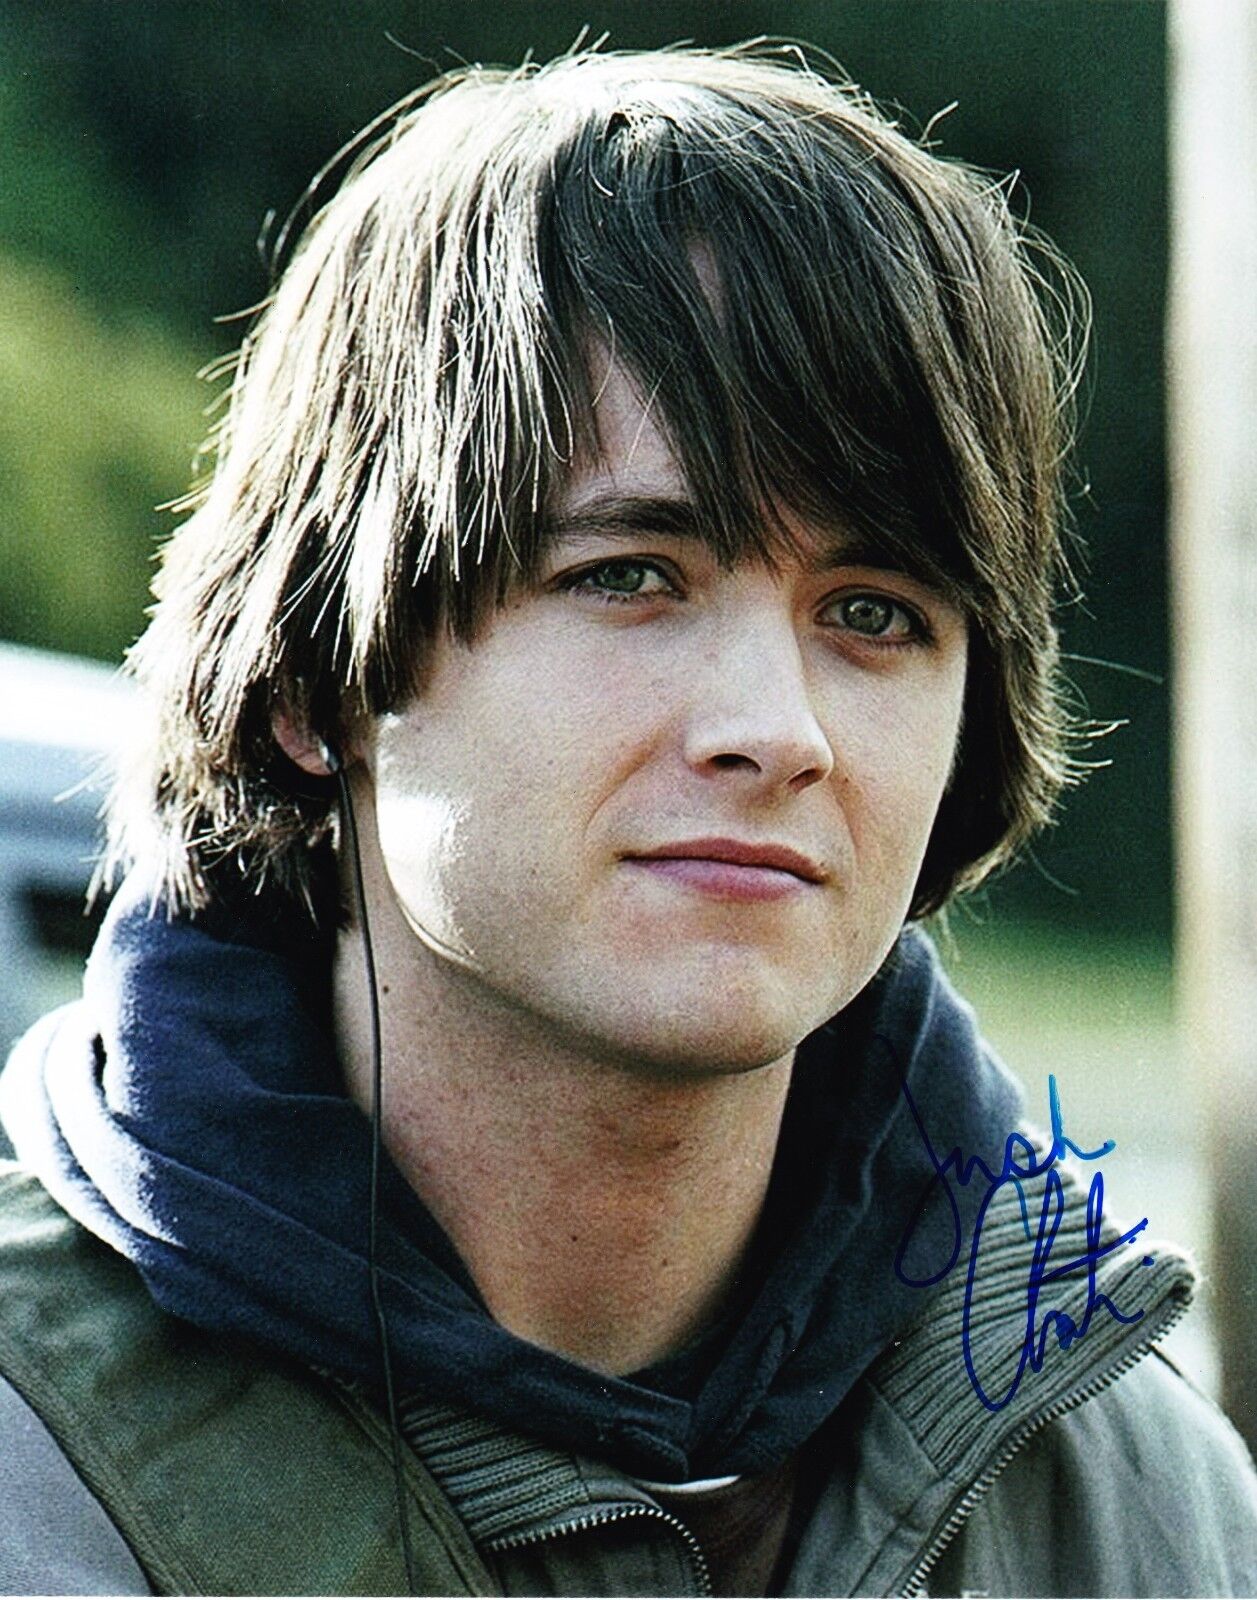 JUSTIN CHATWIN SIGNED 8X10 PHOTO AUTHENTIC AUTOGRAPH WAR OF THE WORLDS COA